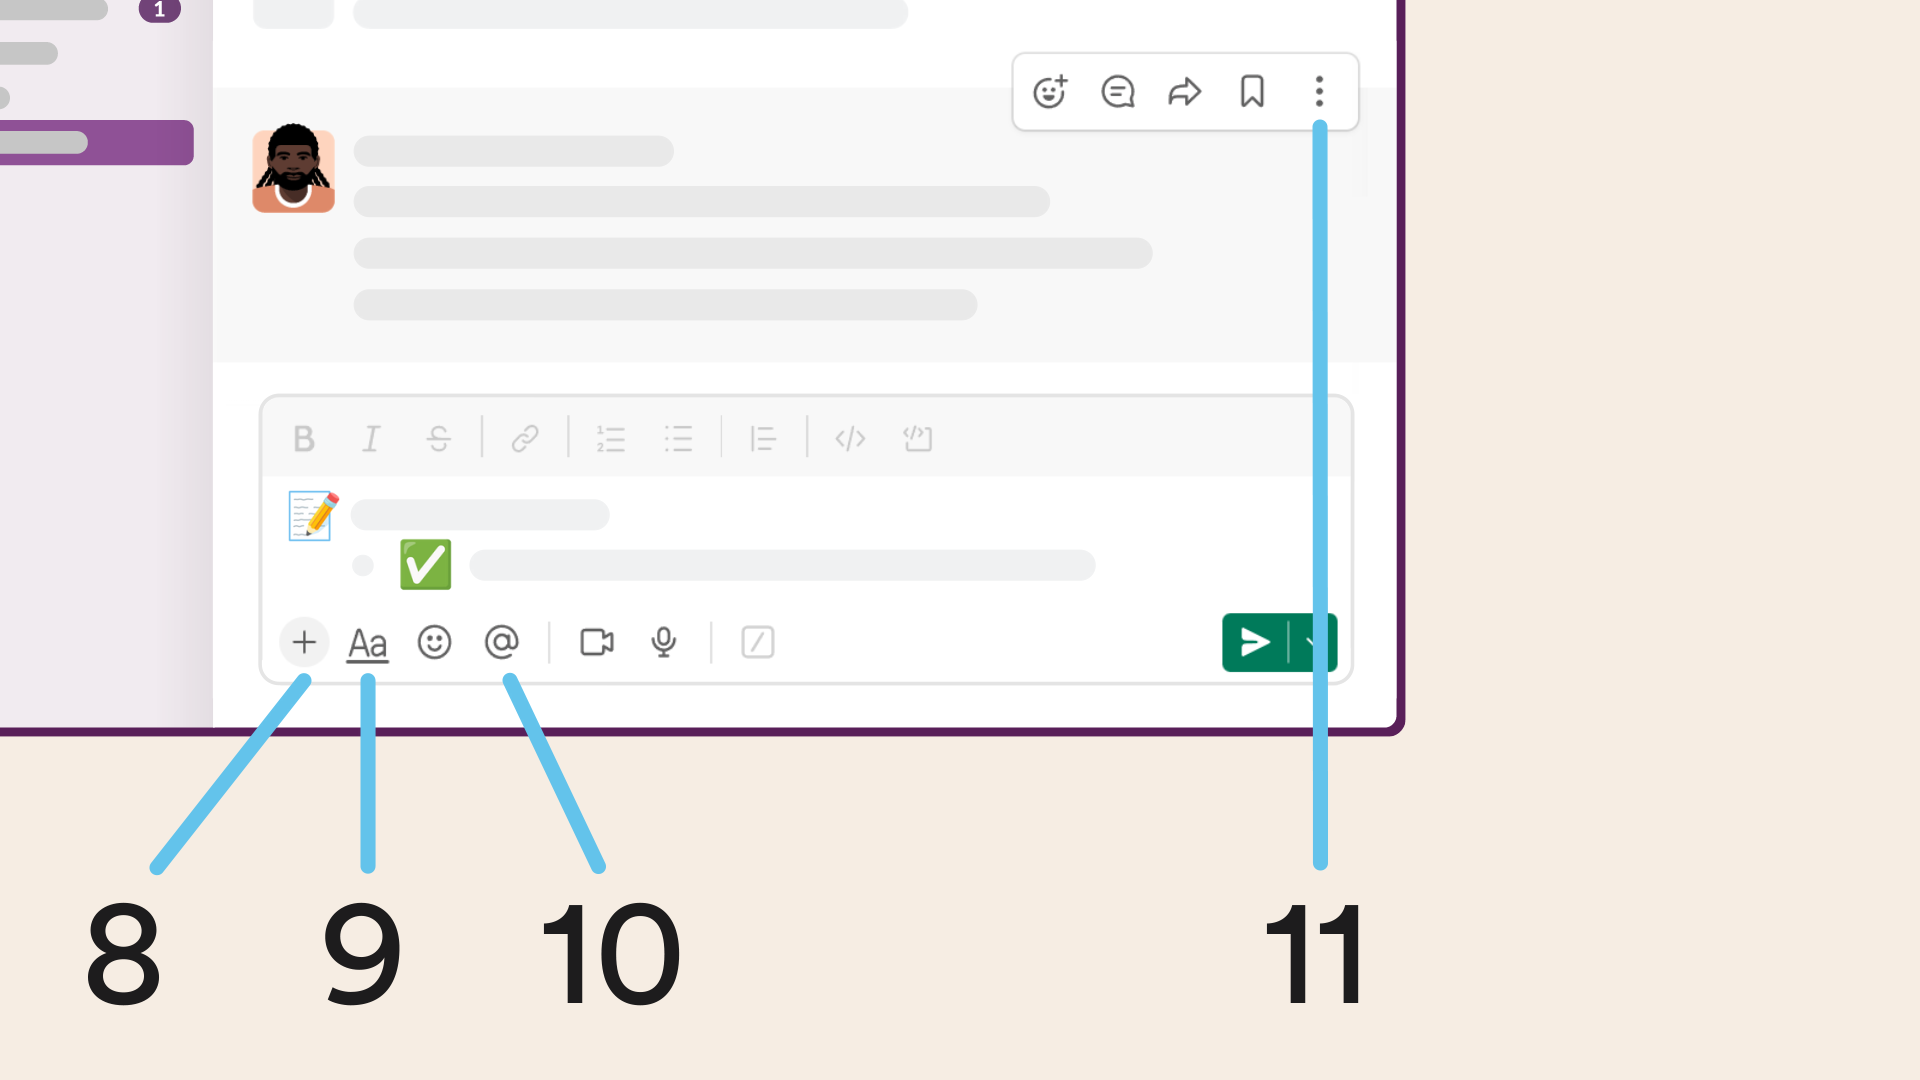 View of the message field in Slack